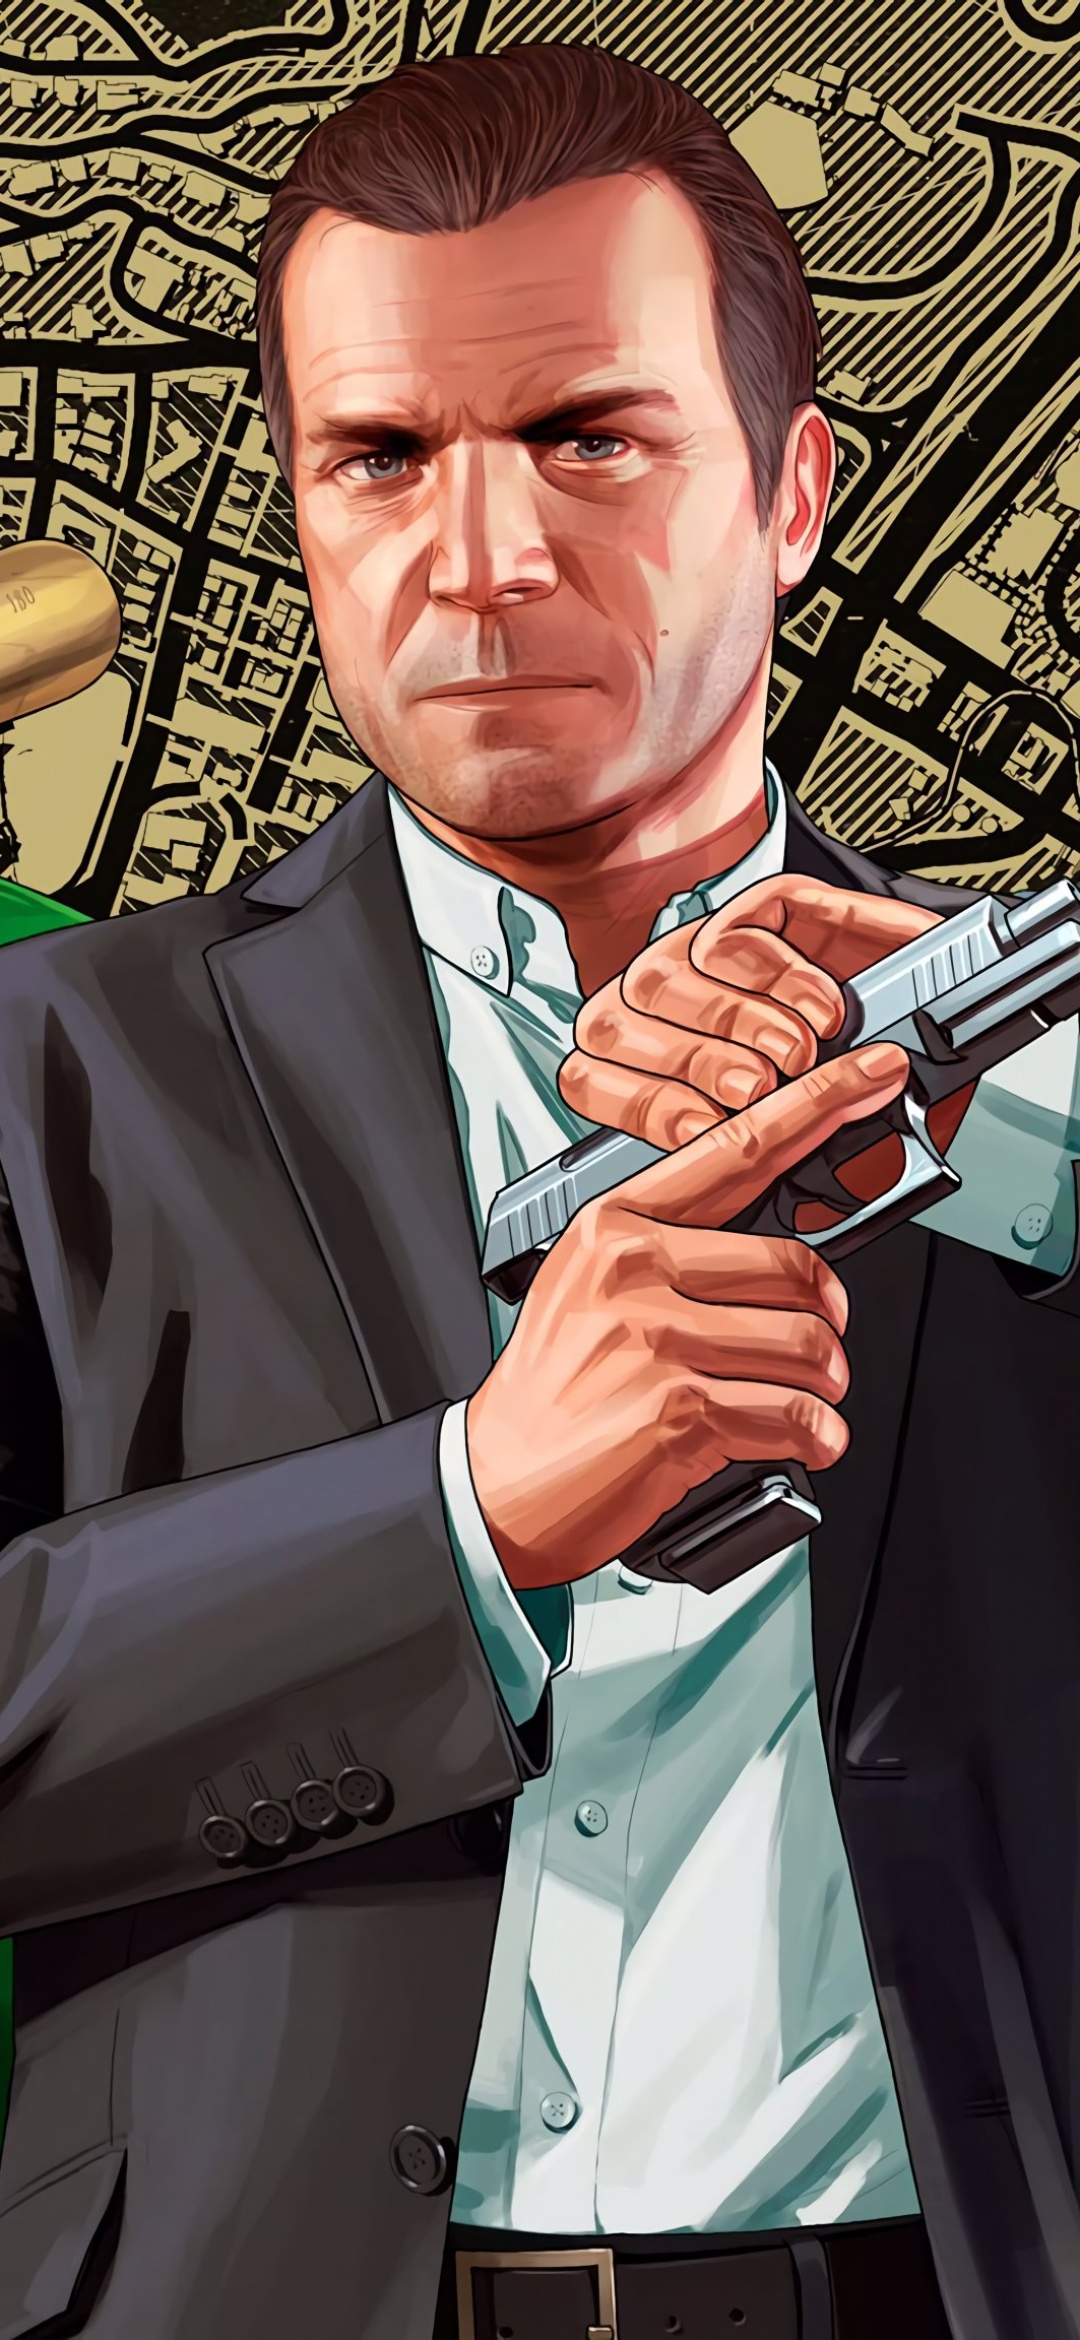 The Grand Theft Auto Gangster Experience of GTA Games - G2A News